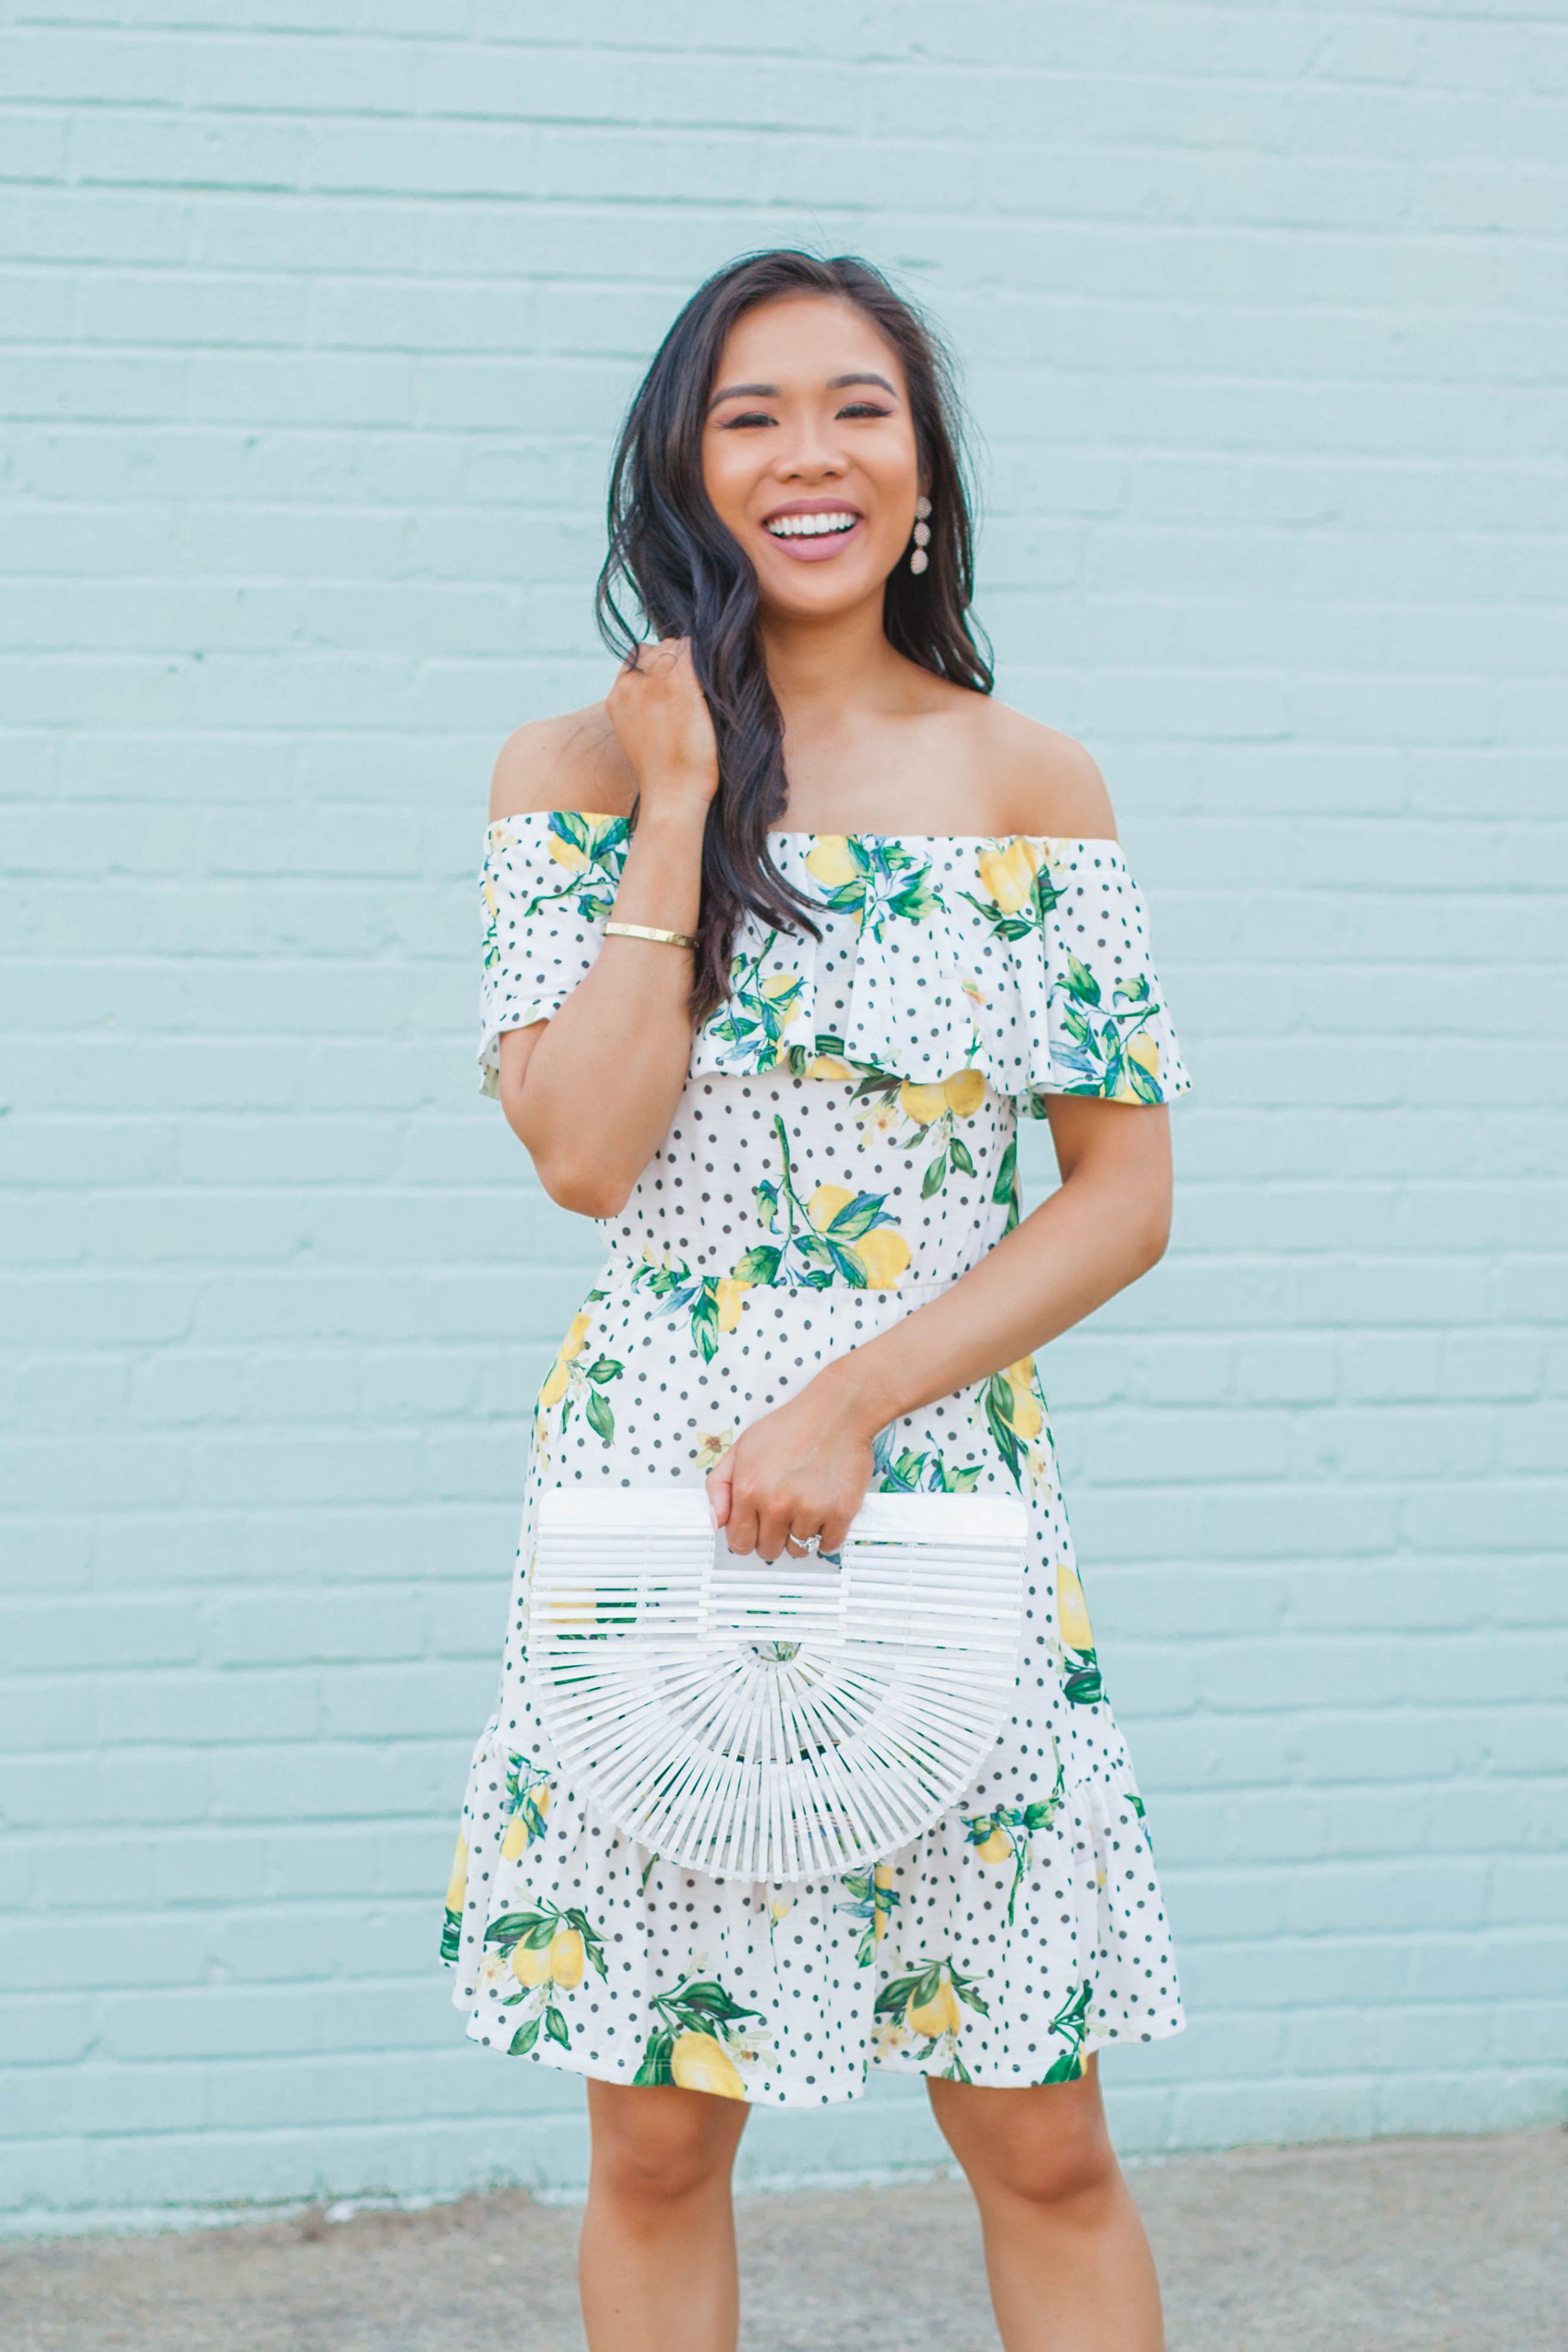 Off the shoulder lemon print dress with a white acrylic bag and Olive + Piper earrings for summer outfit idea